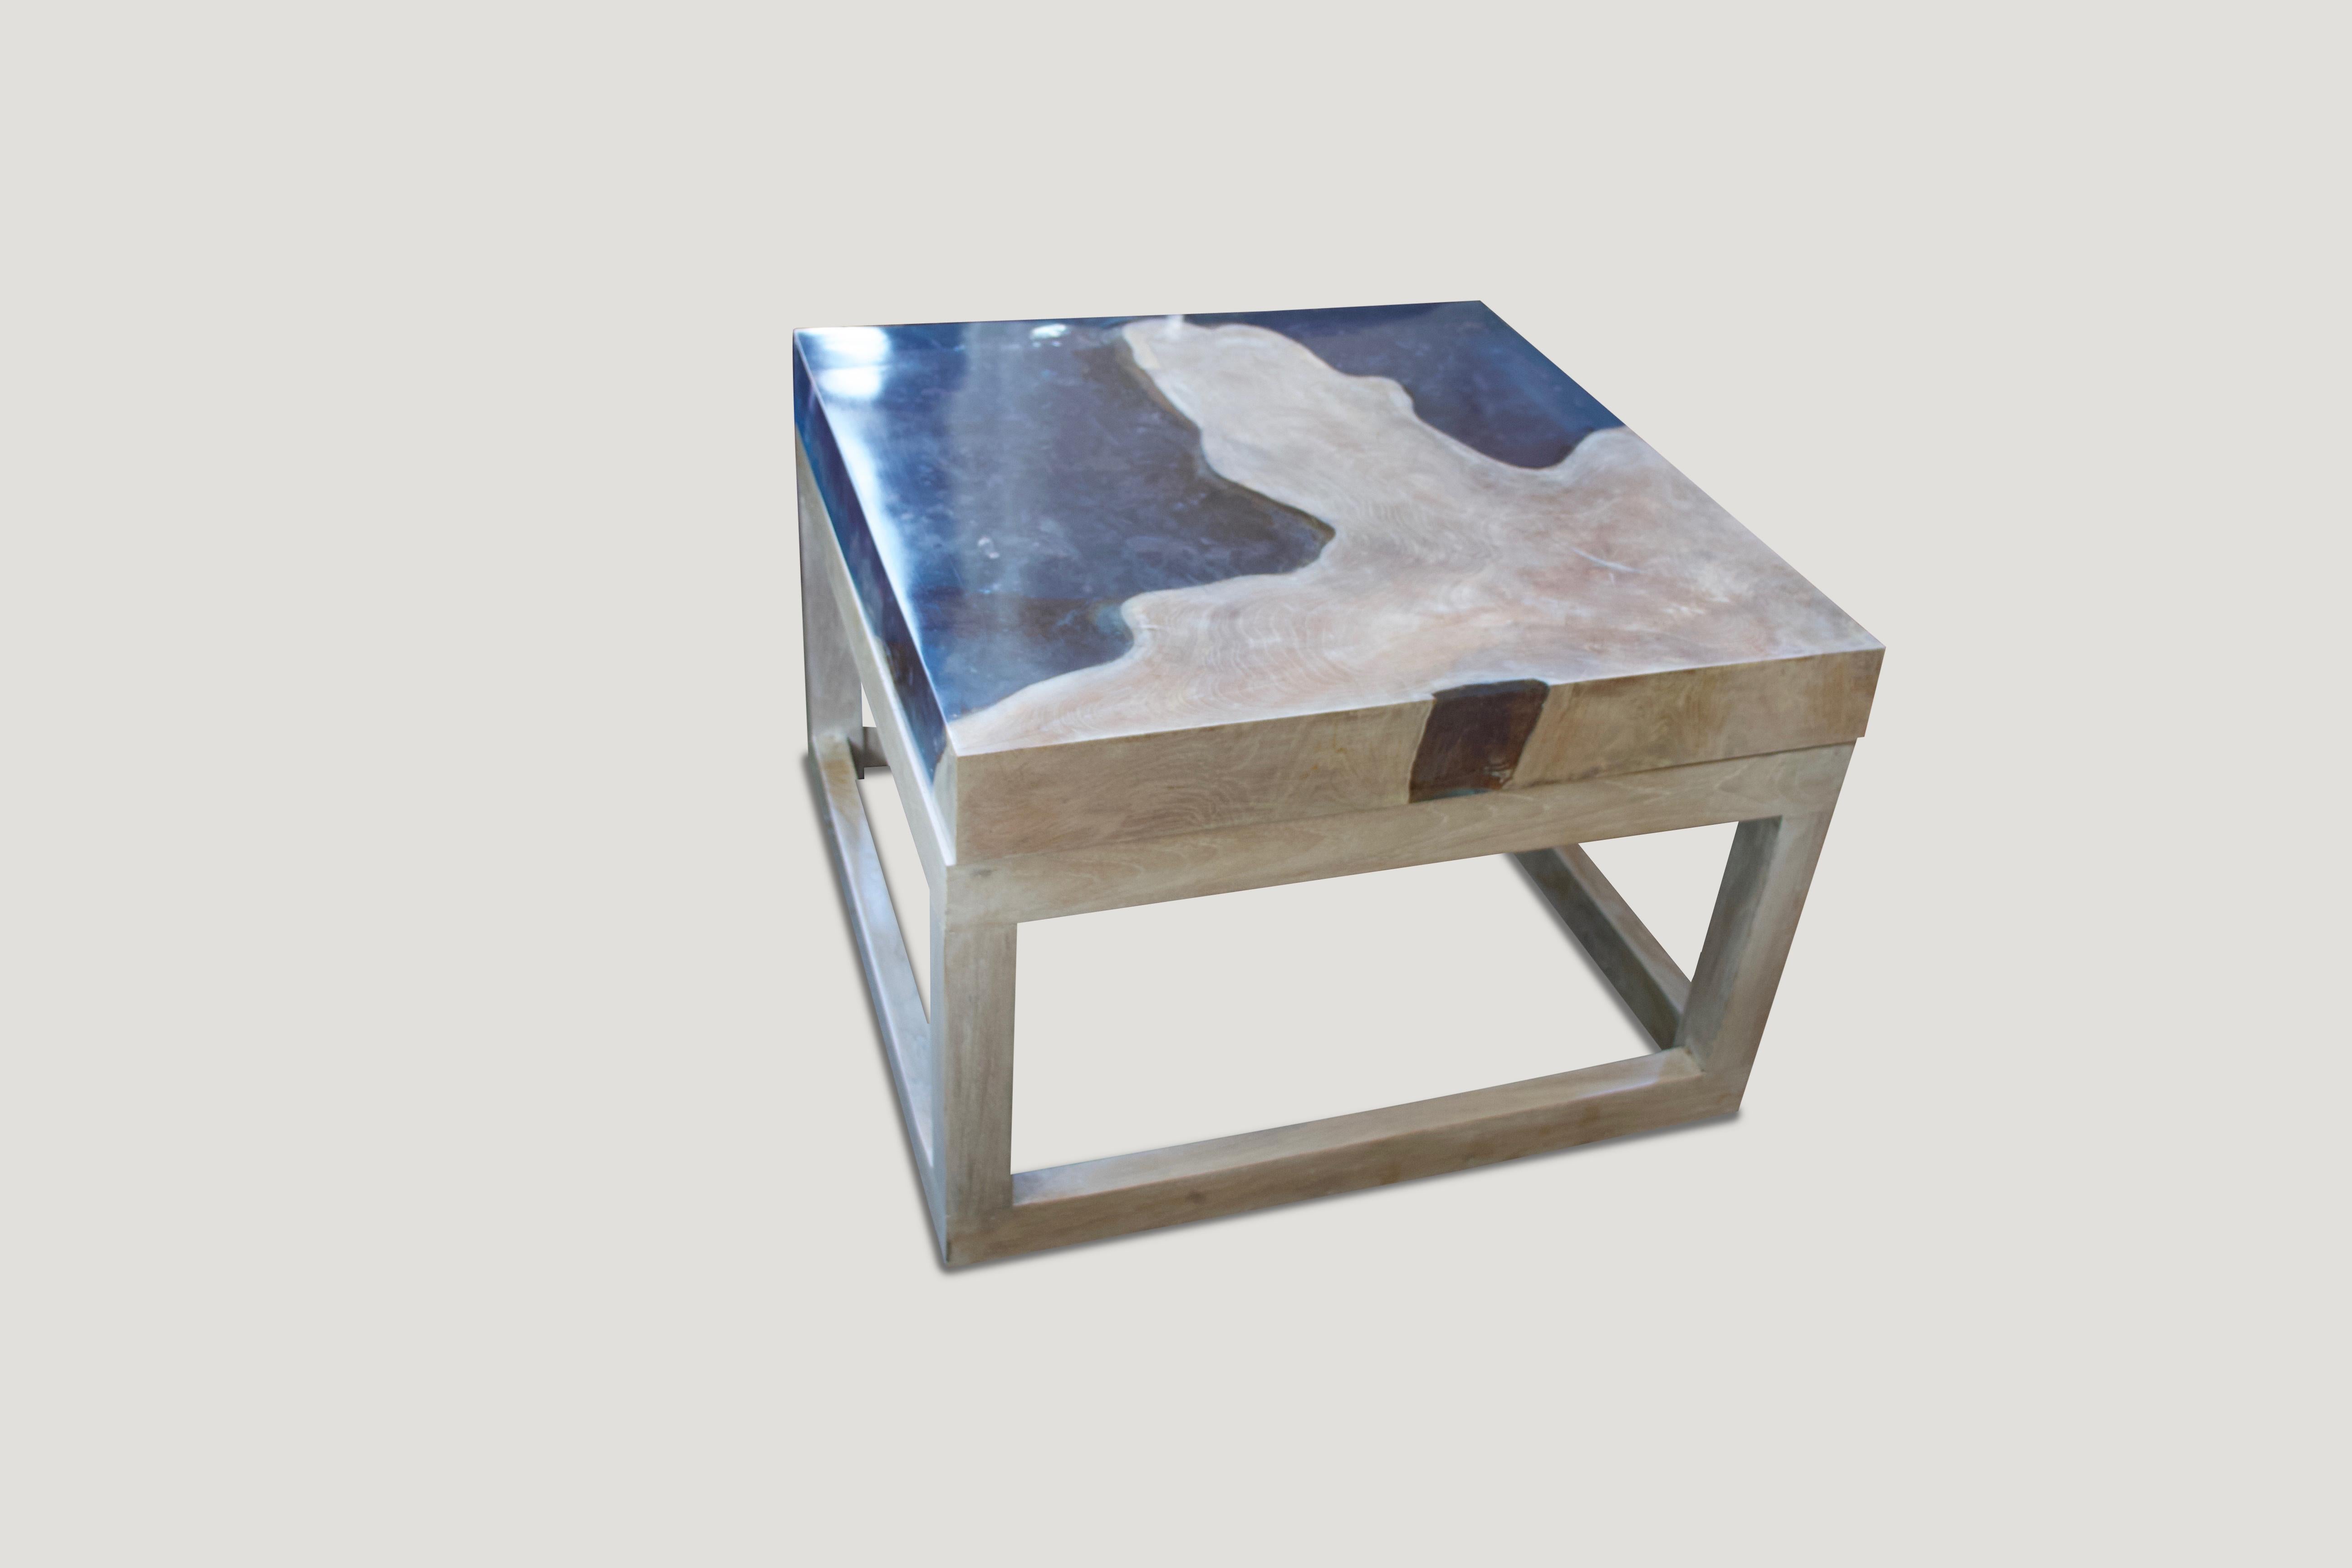 This St. Barts coffee table is made from reclaimed teak infused with ice blue resin, which resembles a unique quartz crystal with many different facets. Straight modern lines with a 3” solid teak and cracked resin top make this an impressive coffee